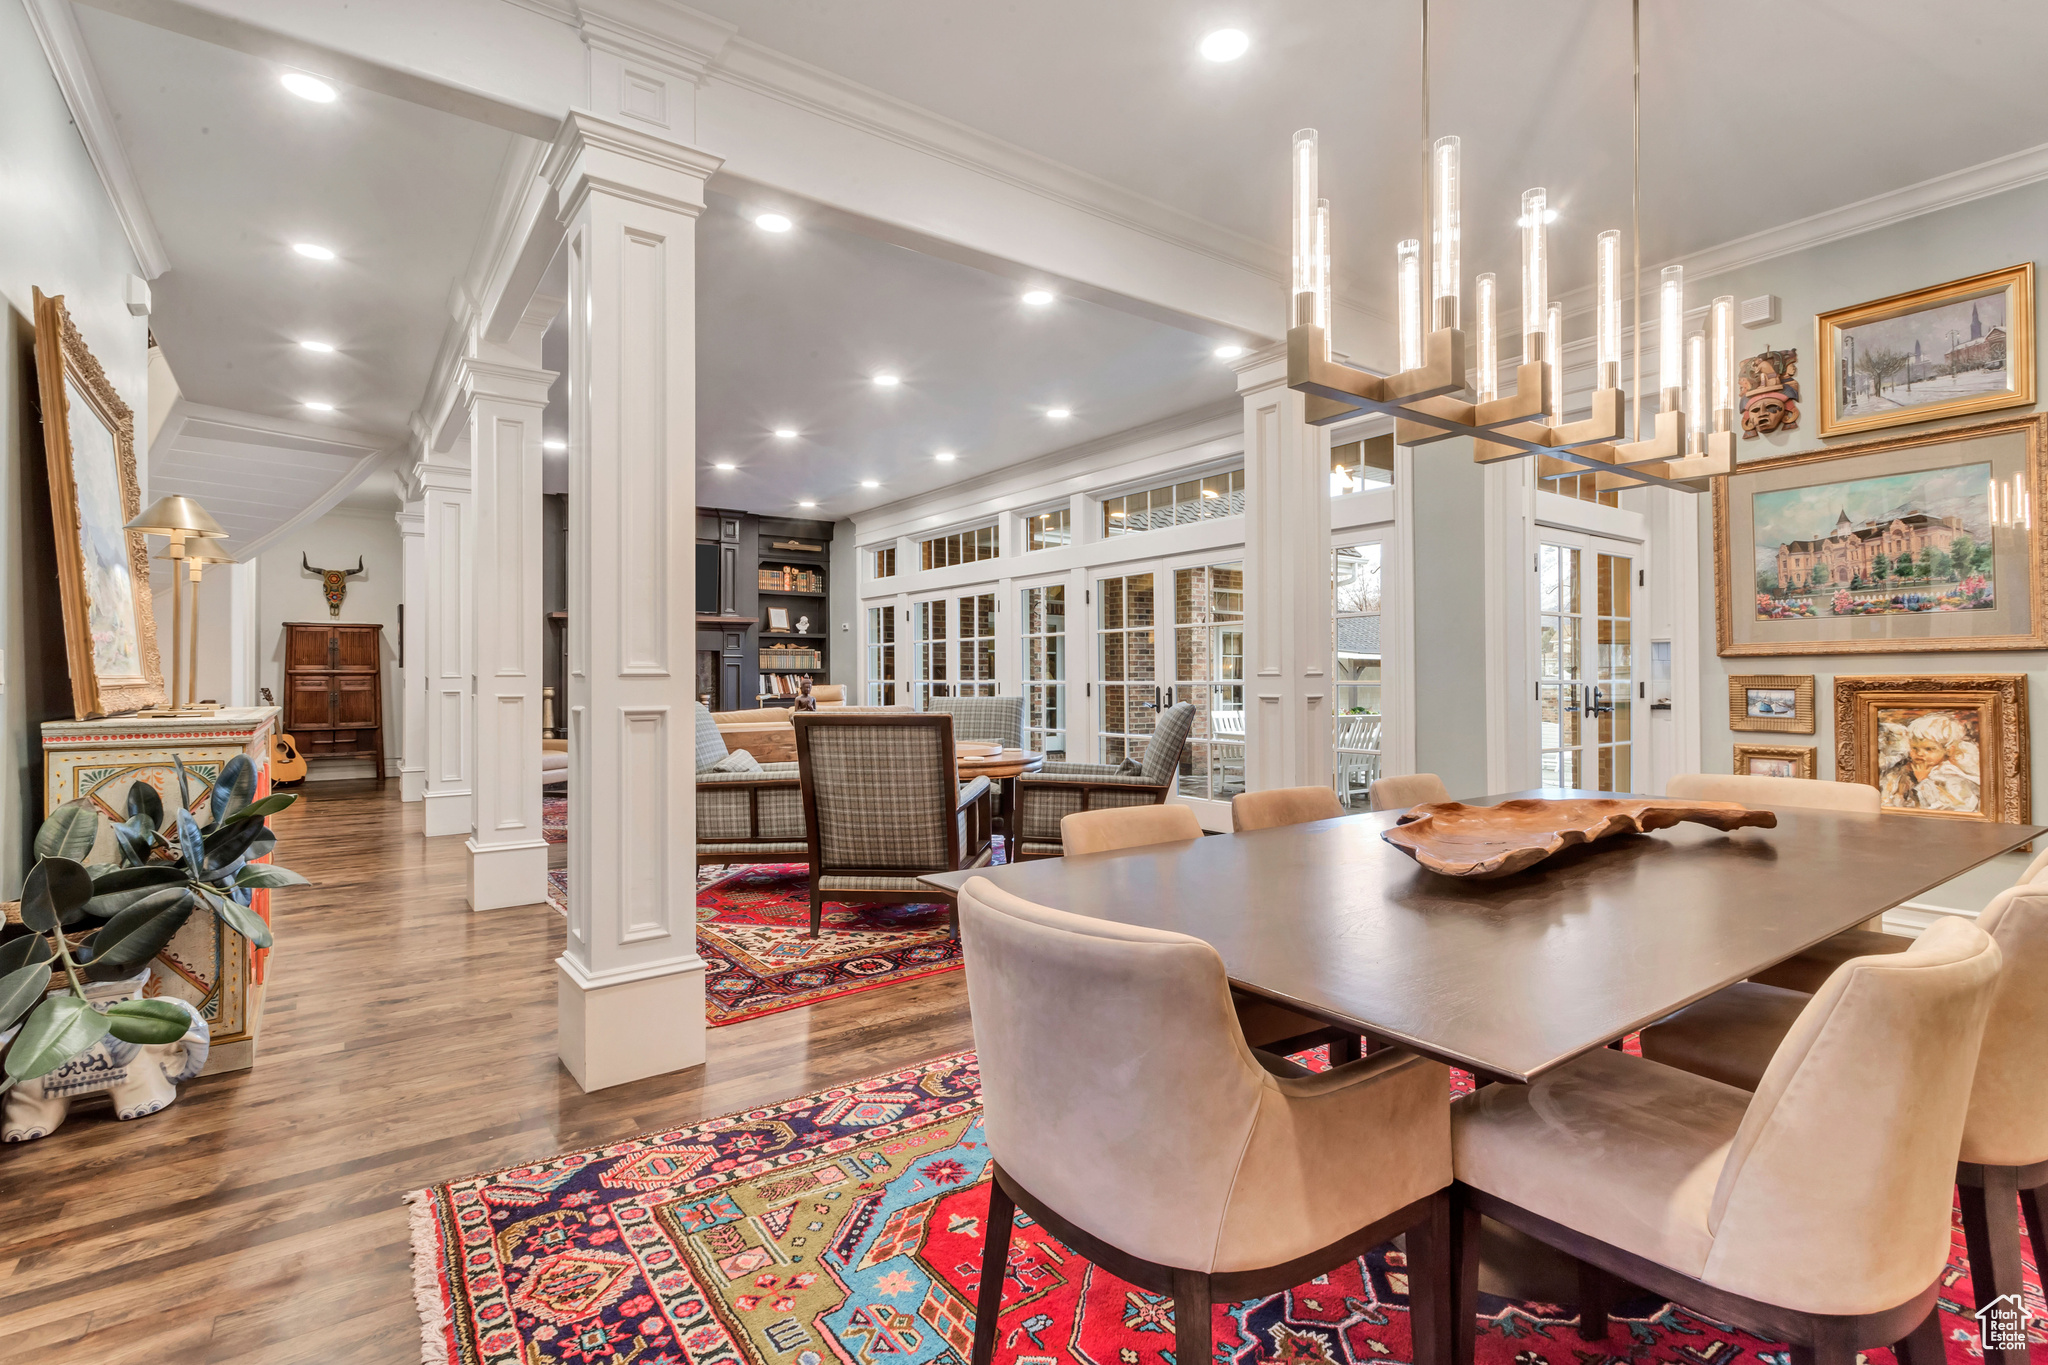 Dining space with light hardwood / wood flooring, crown molding, and ornate columns